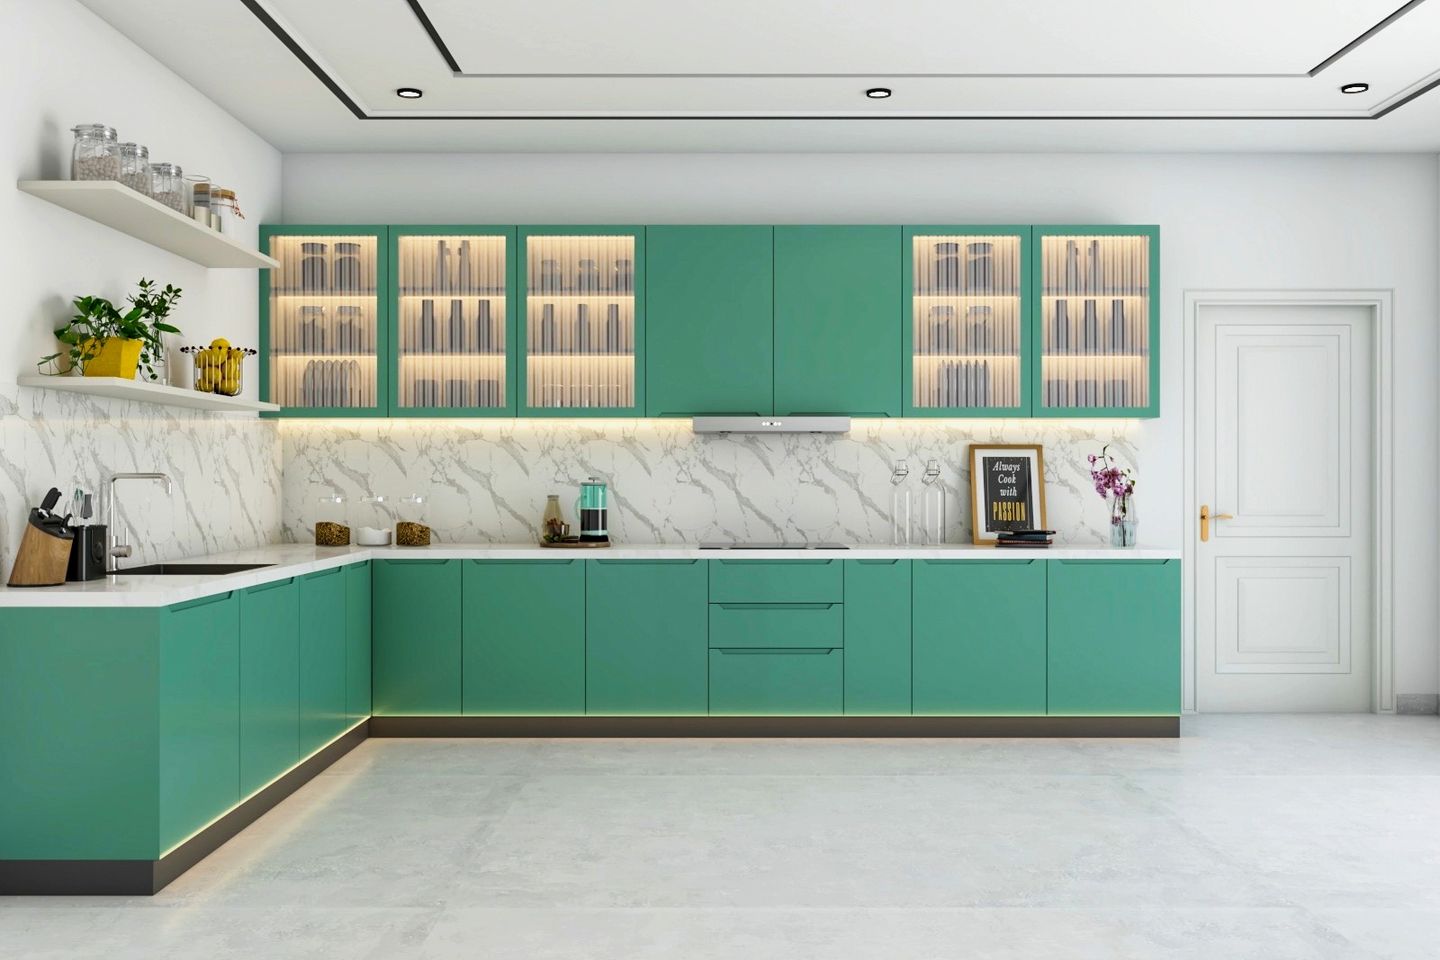 13x12 Ft Modular L-Shaped Kitchen Cabinet Design With Pino Tropicale Cabinets And Under-Cabinet Lighting - Livspace